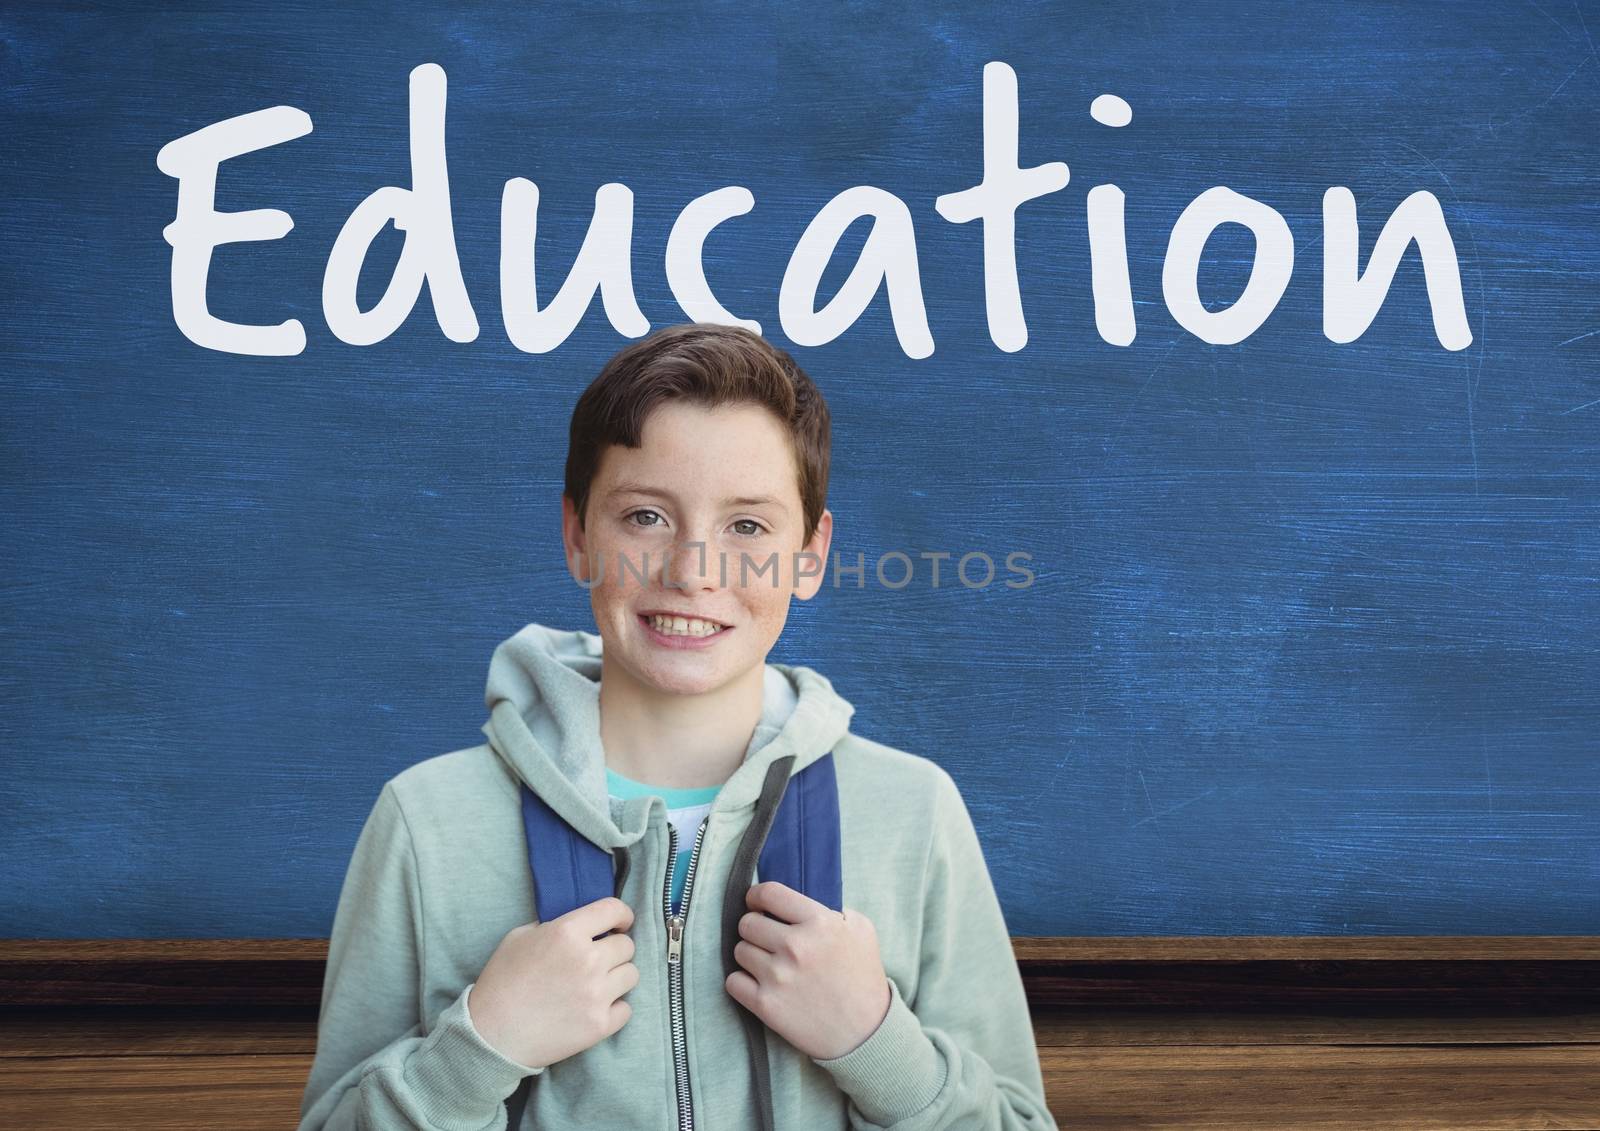 Digital composite of Education text on blackboard with school student